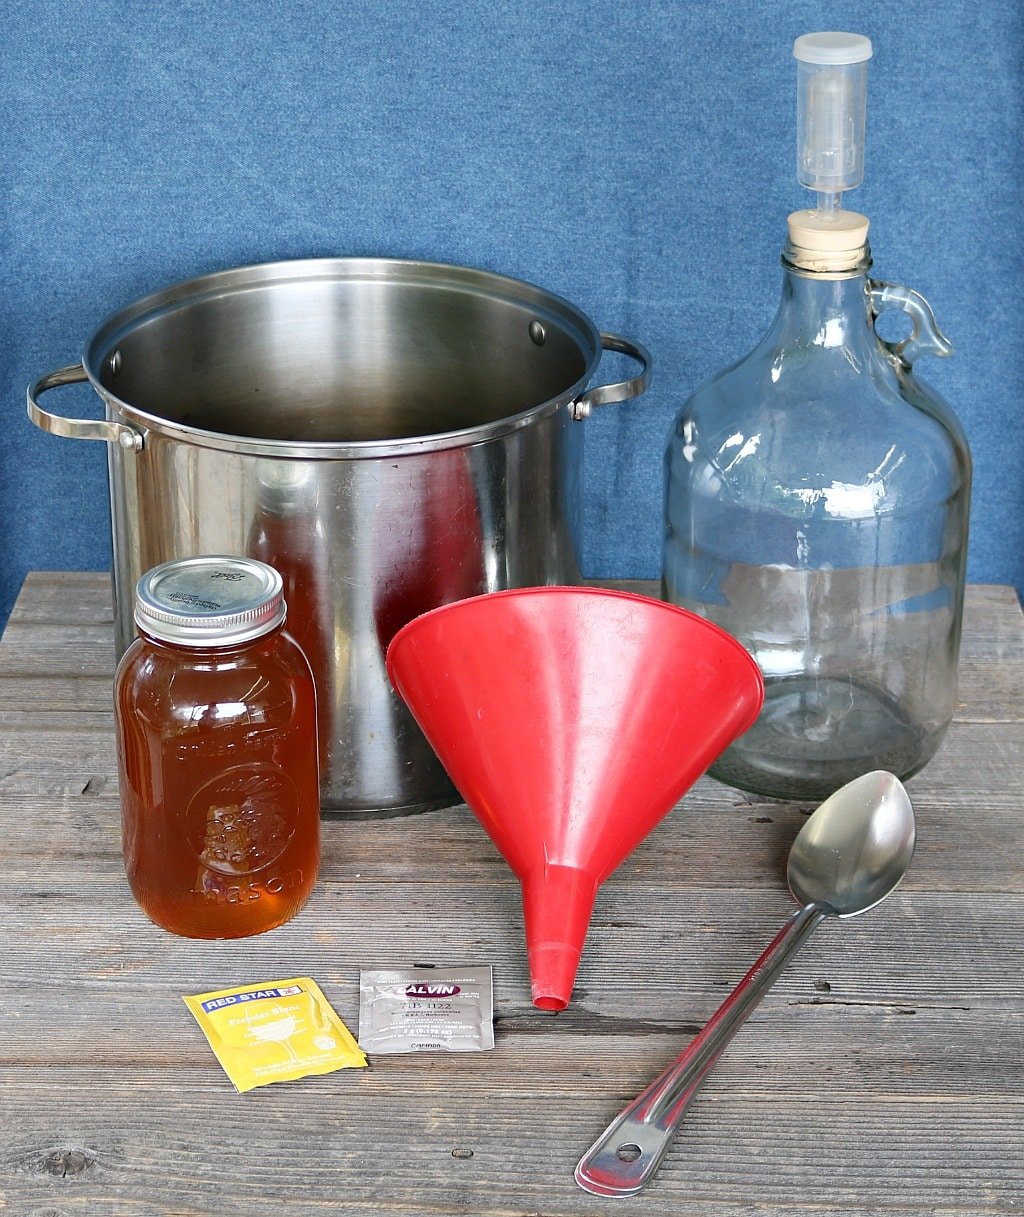 mead equipment, honey, and yeast on a table